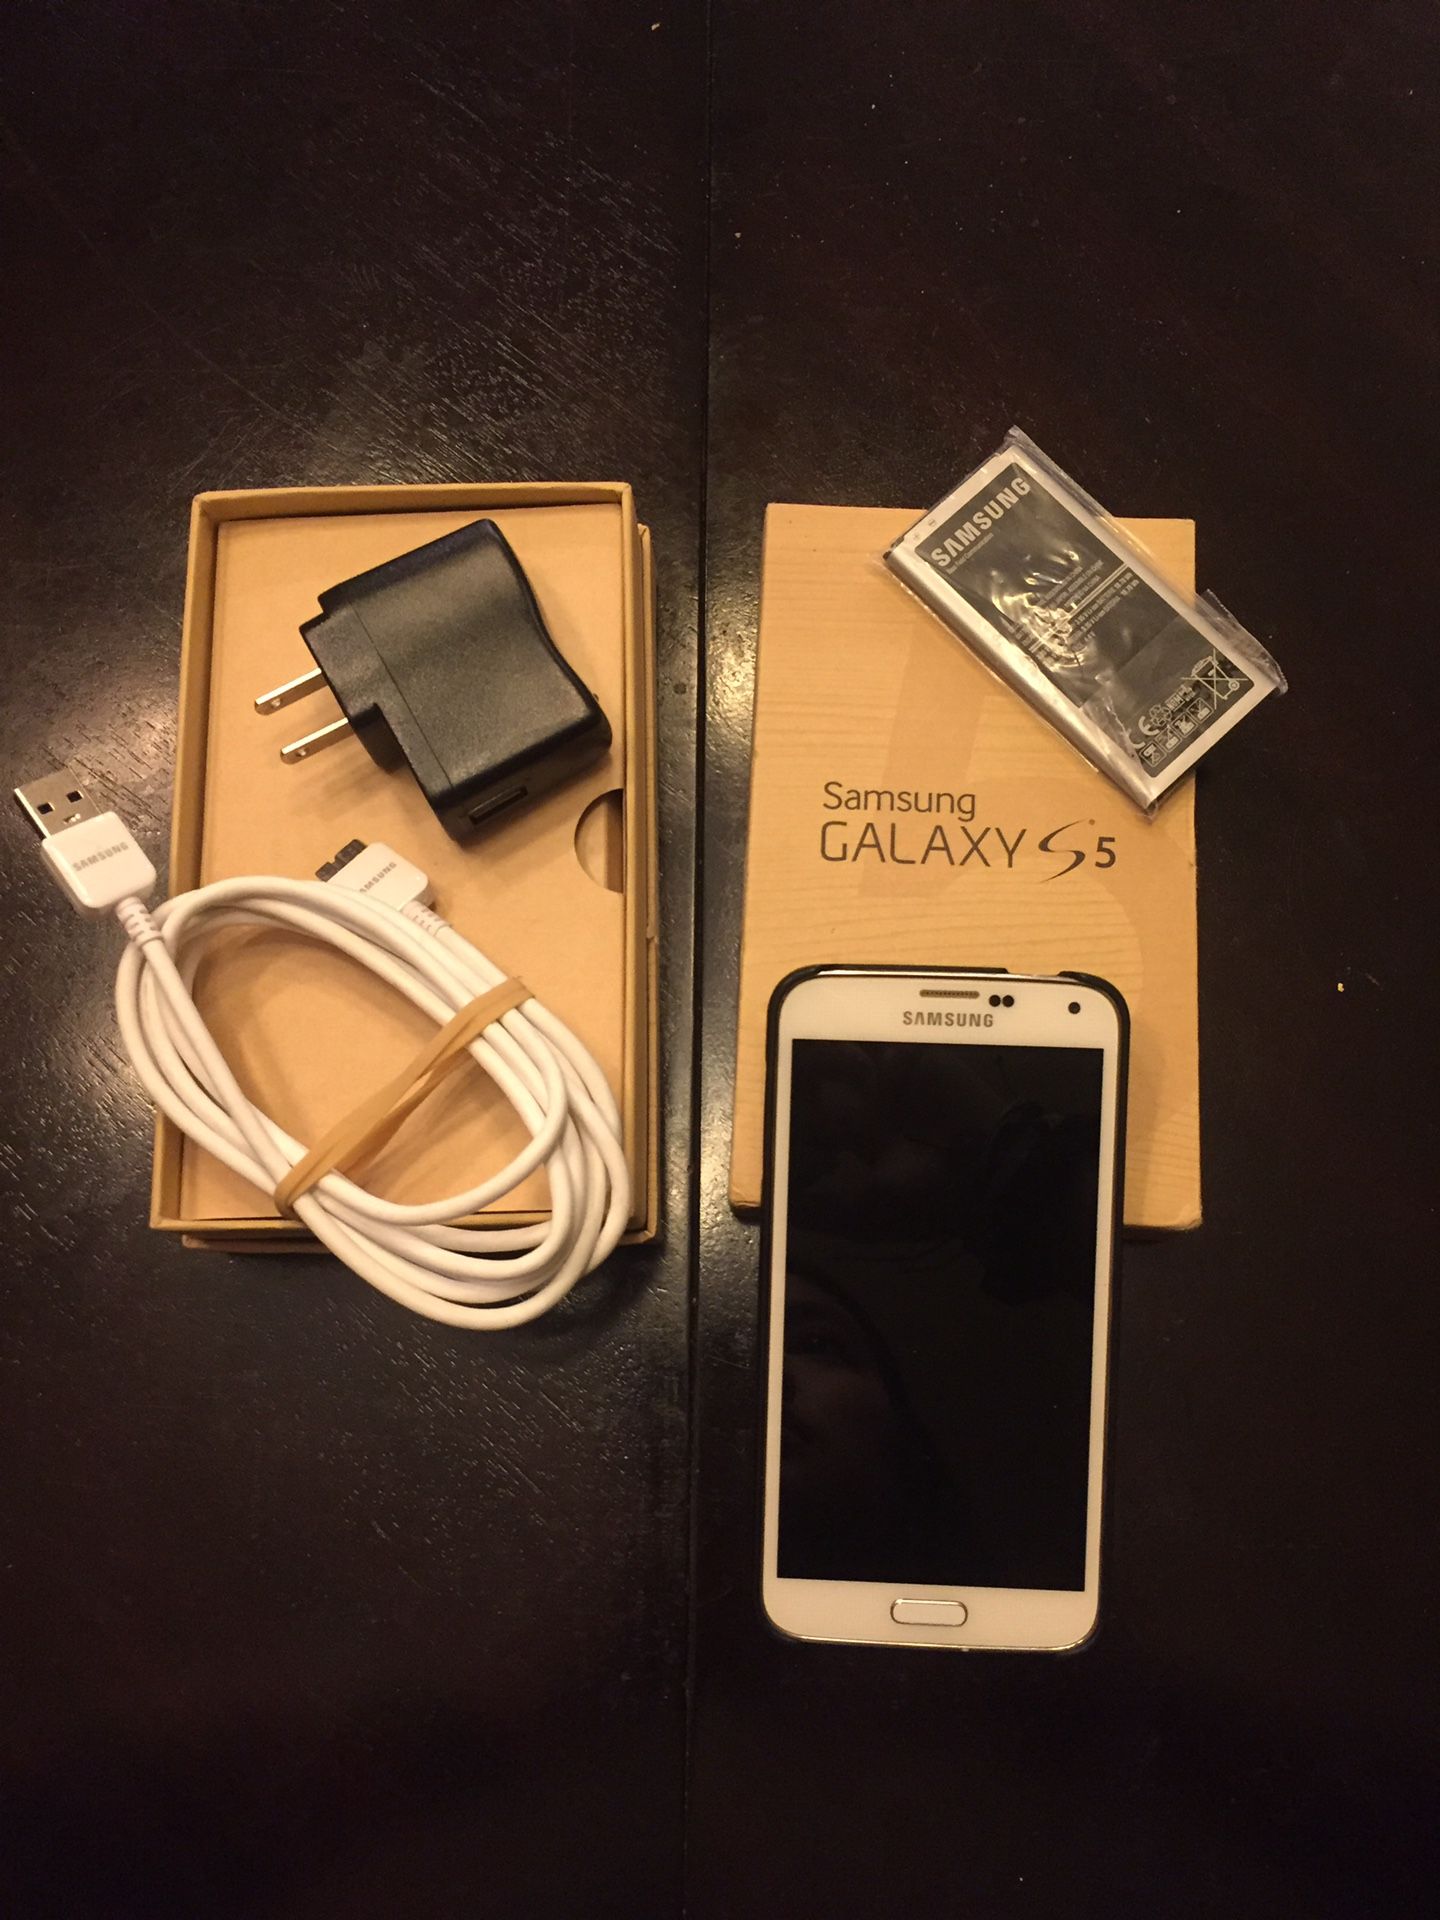 Samsung Galaxy S5 w/ Case, Charger, and Extra Battery